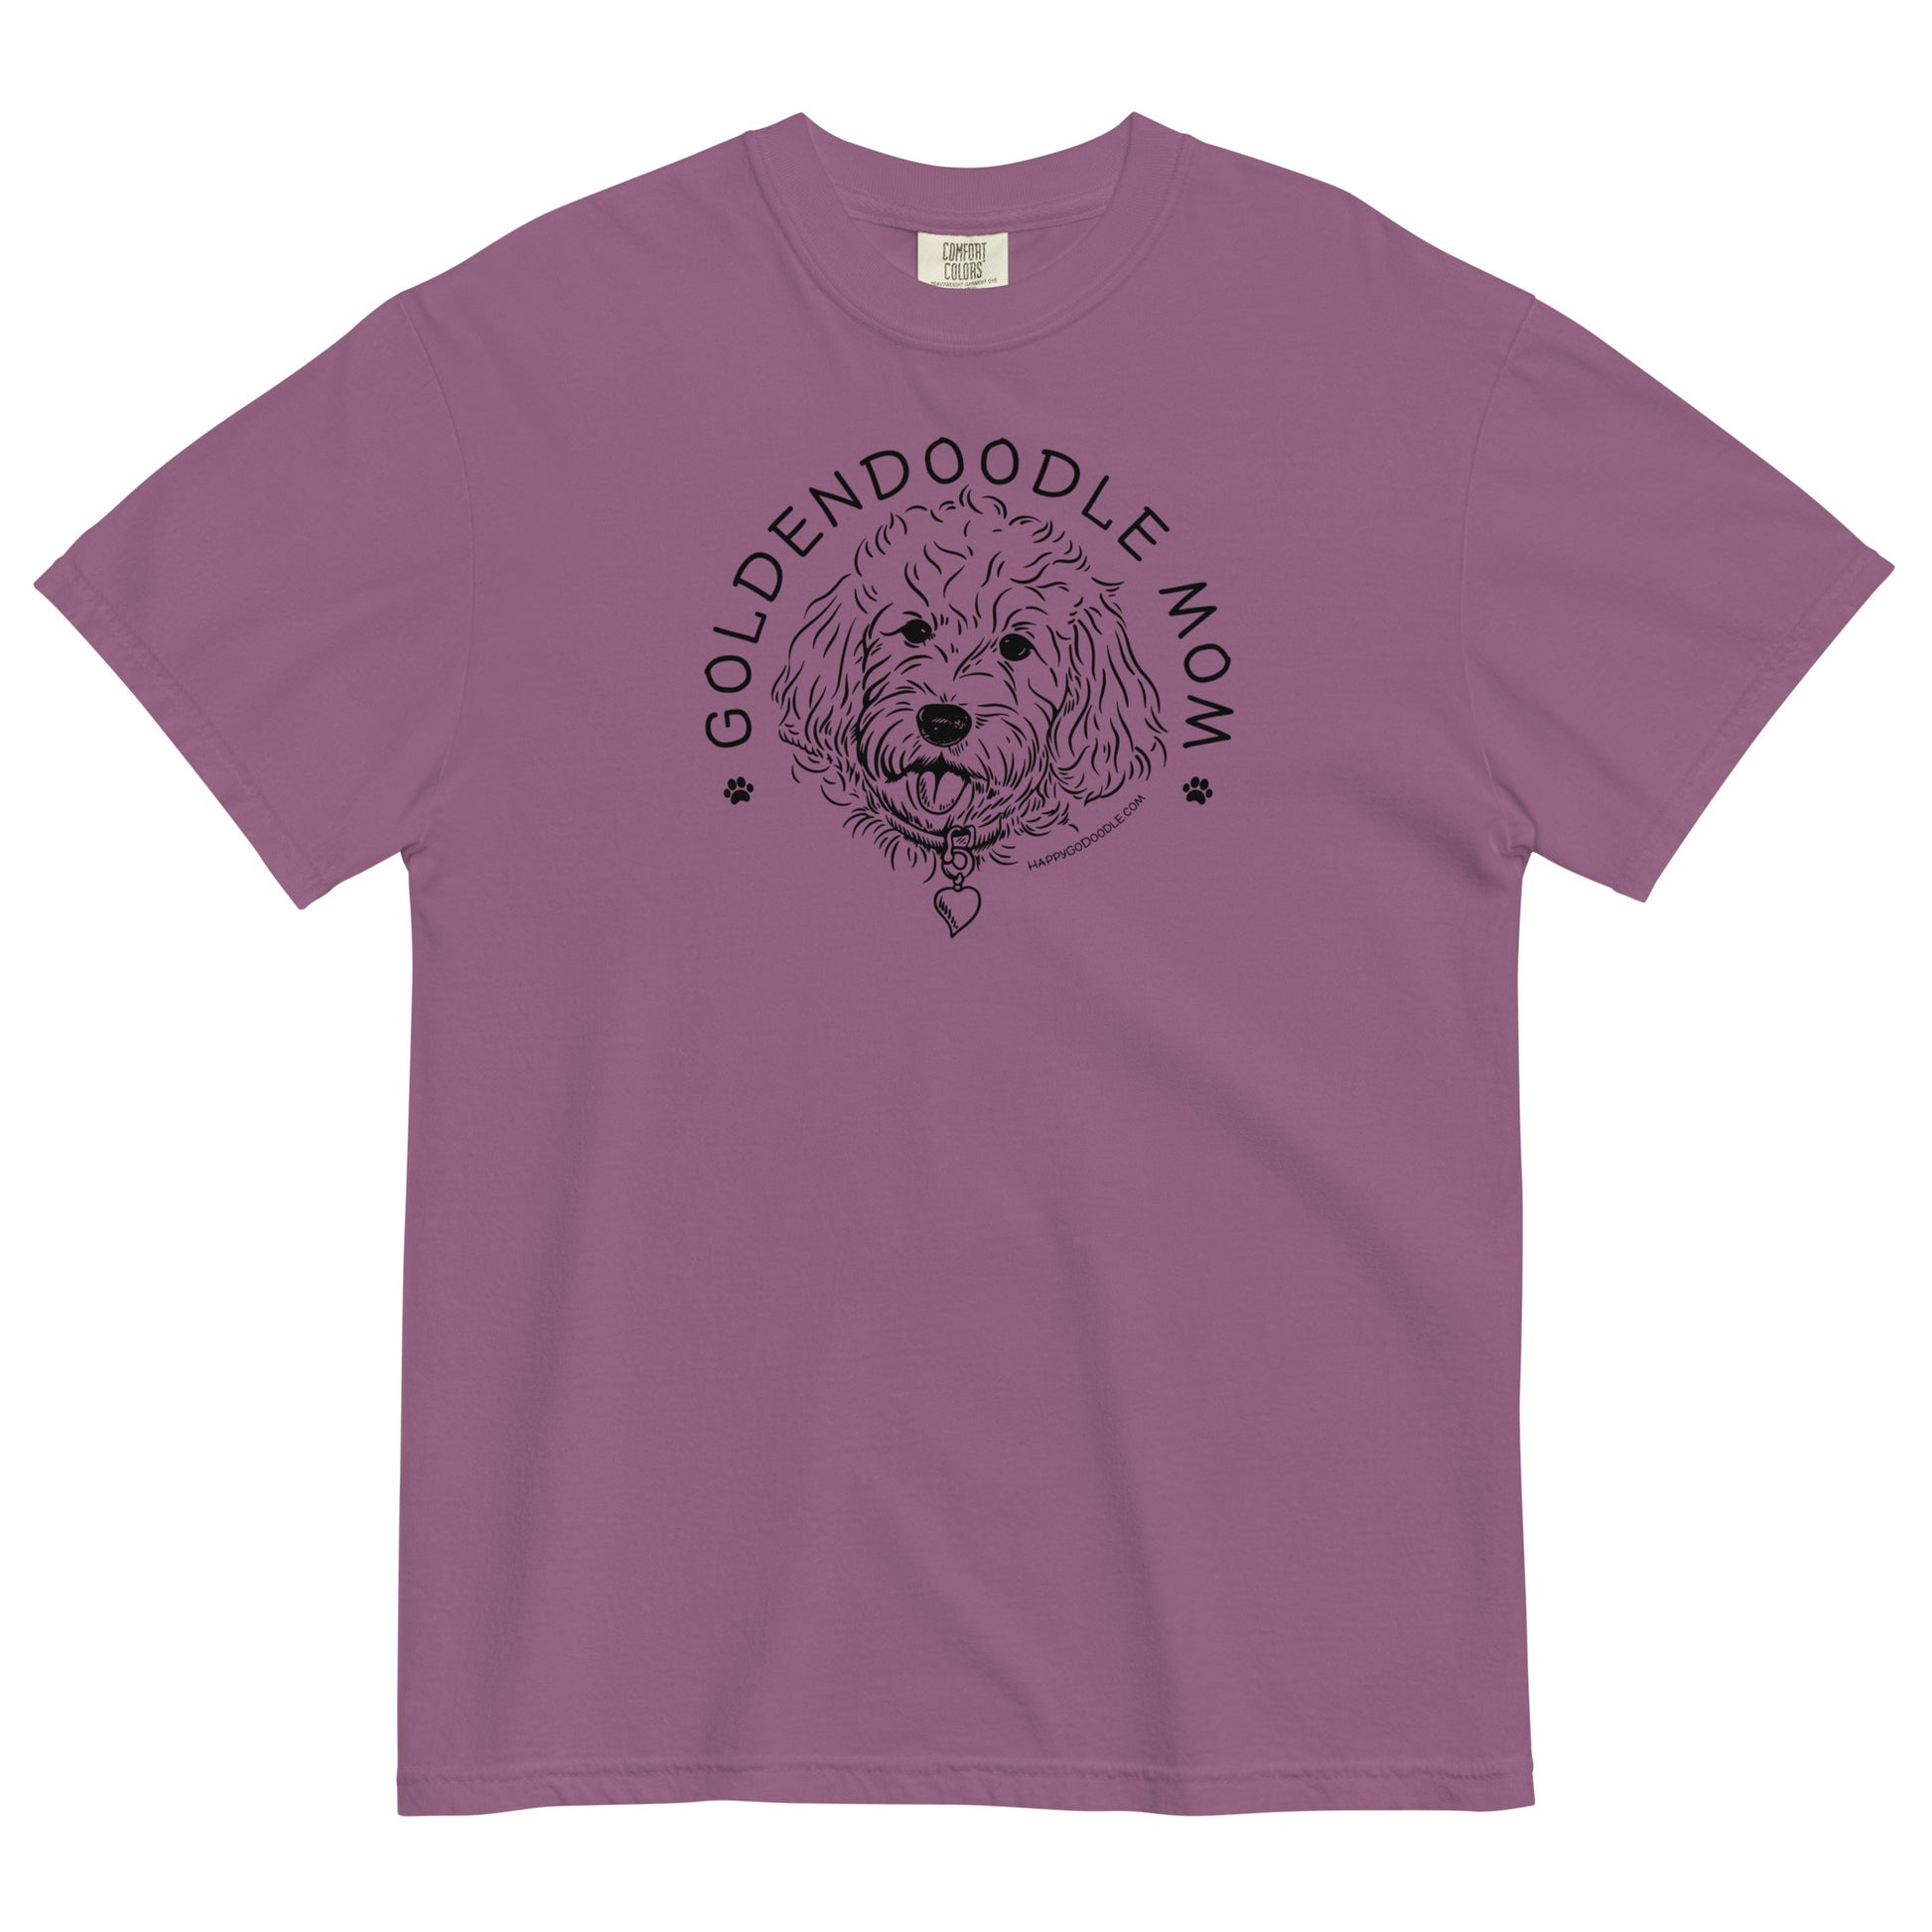 Goldendoodle Mom comfort colors t-shirt with Goldendoodle face and words "Goldendoodle Mom" in berry color